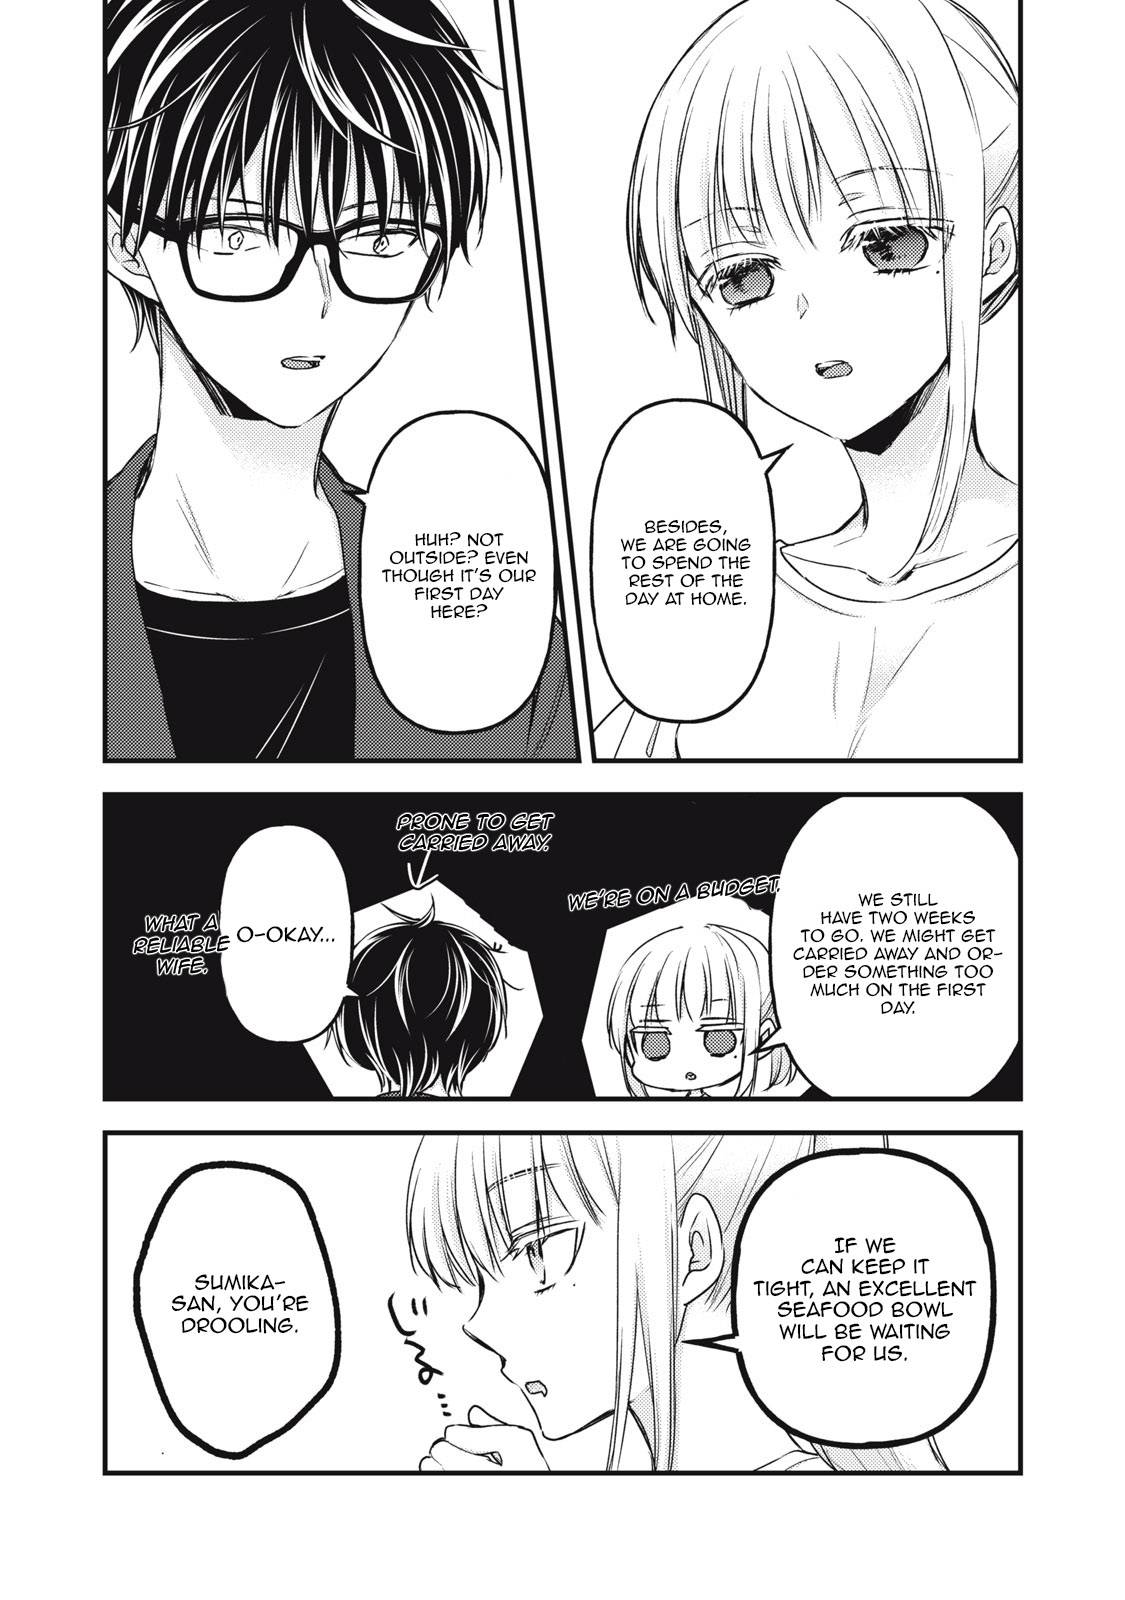 We May Be an Inexperienced Couple but... chapter 107 page 4